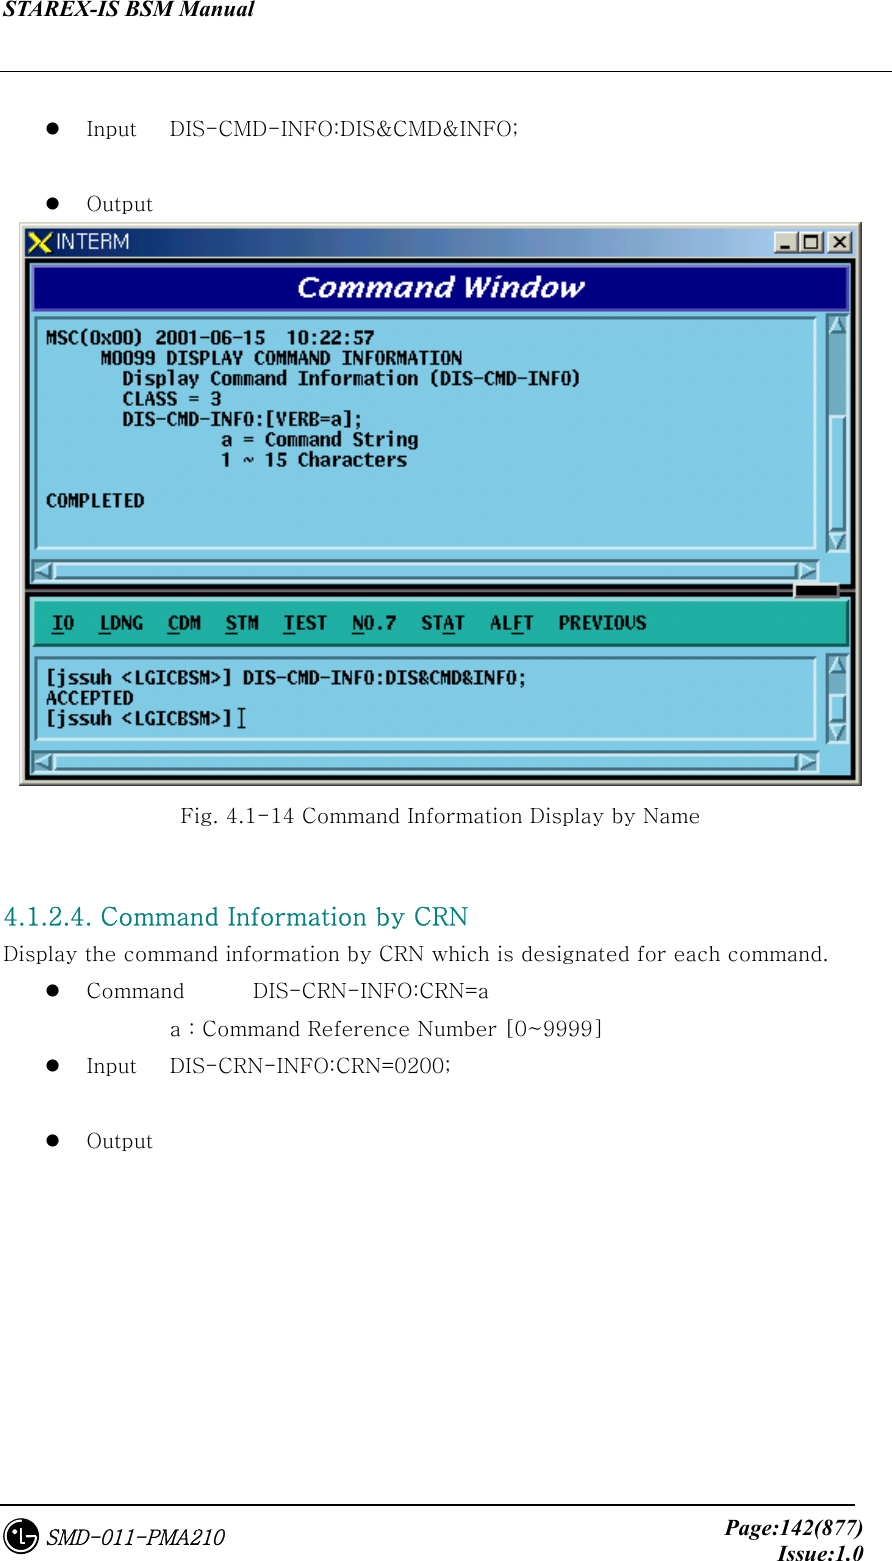 STAREX-IS BSM Manual     Page:142(877)Issue:1.0SMD-011-PMA210    Input  DIS-CMD-INFO:DIS&amp;CMD&amp;INFO;    Output  Fig. 4.1-14 Command Information Display by Name  4.1.2.4. Command Information by CRN Display the command information by CRN which is designated for each command.     Command  DIS-CRN-INFO:CRN=a     a : Command Reference Number [0~9999]   Input  DIS-CRN-INFO:CRN=0200;    Output 